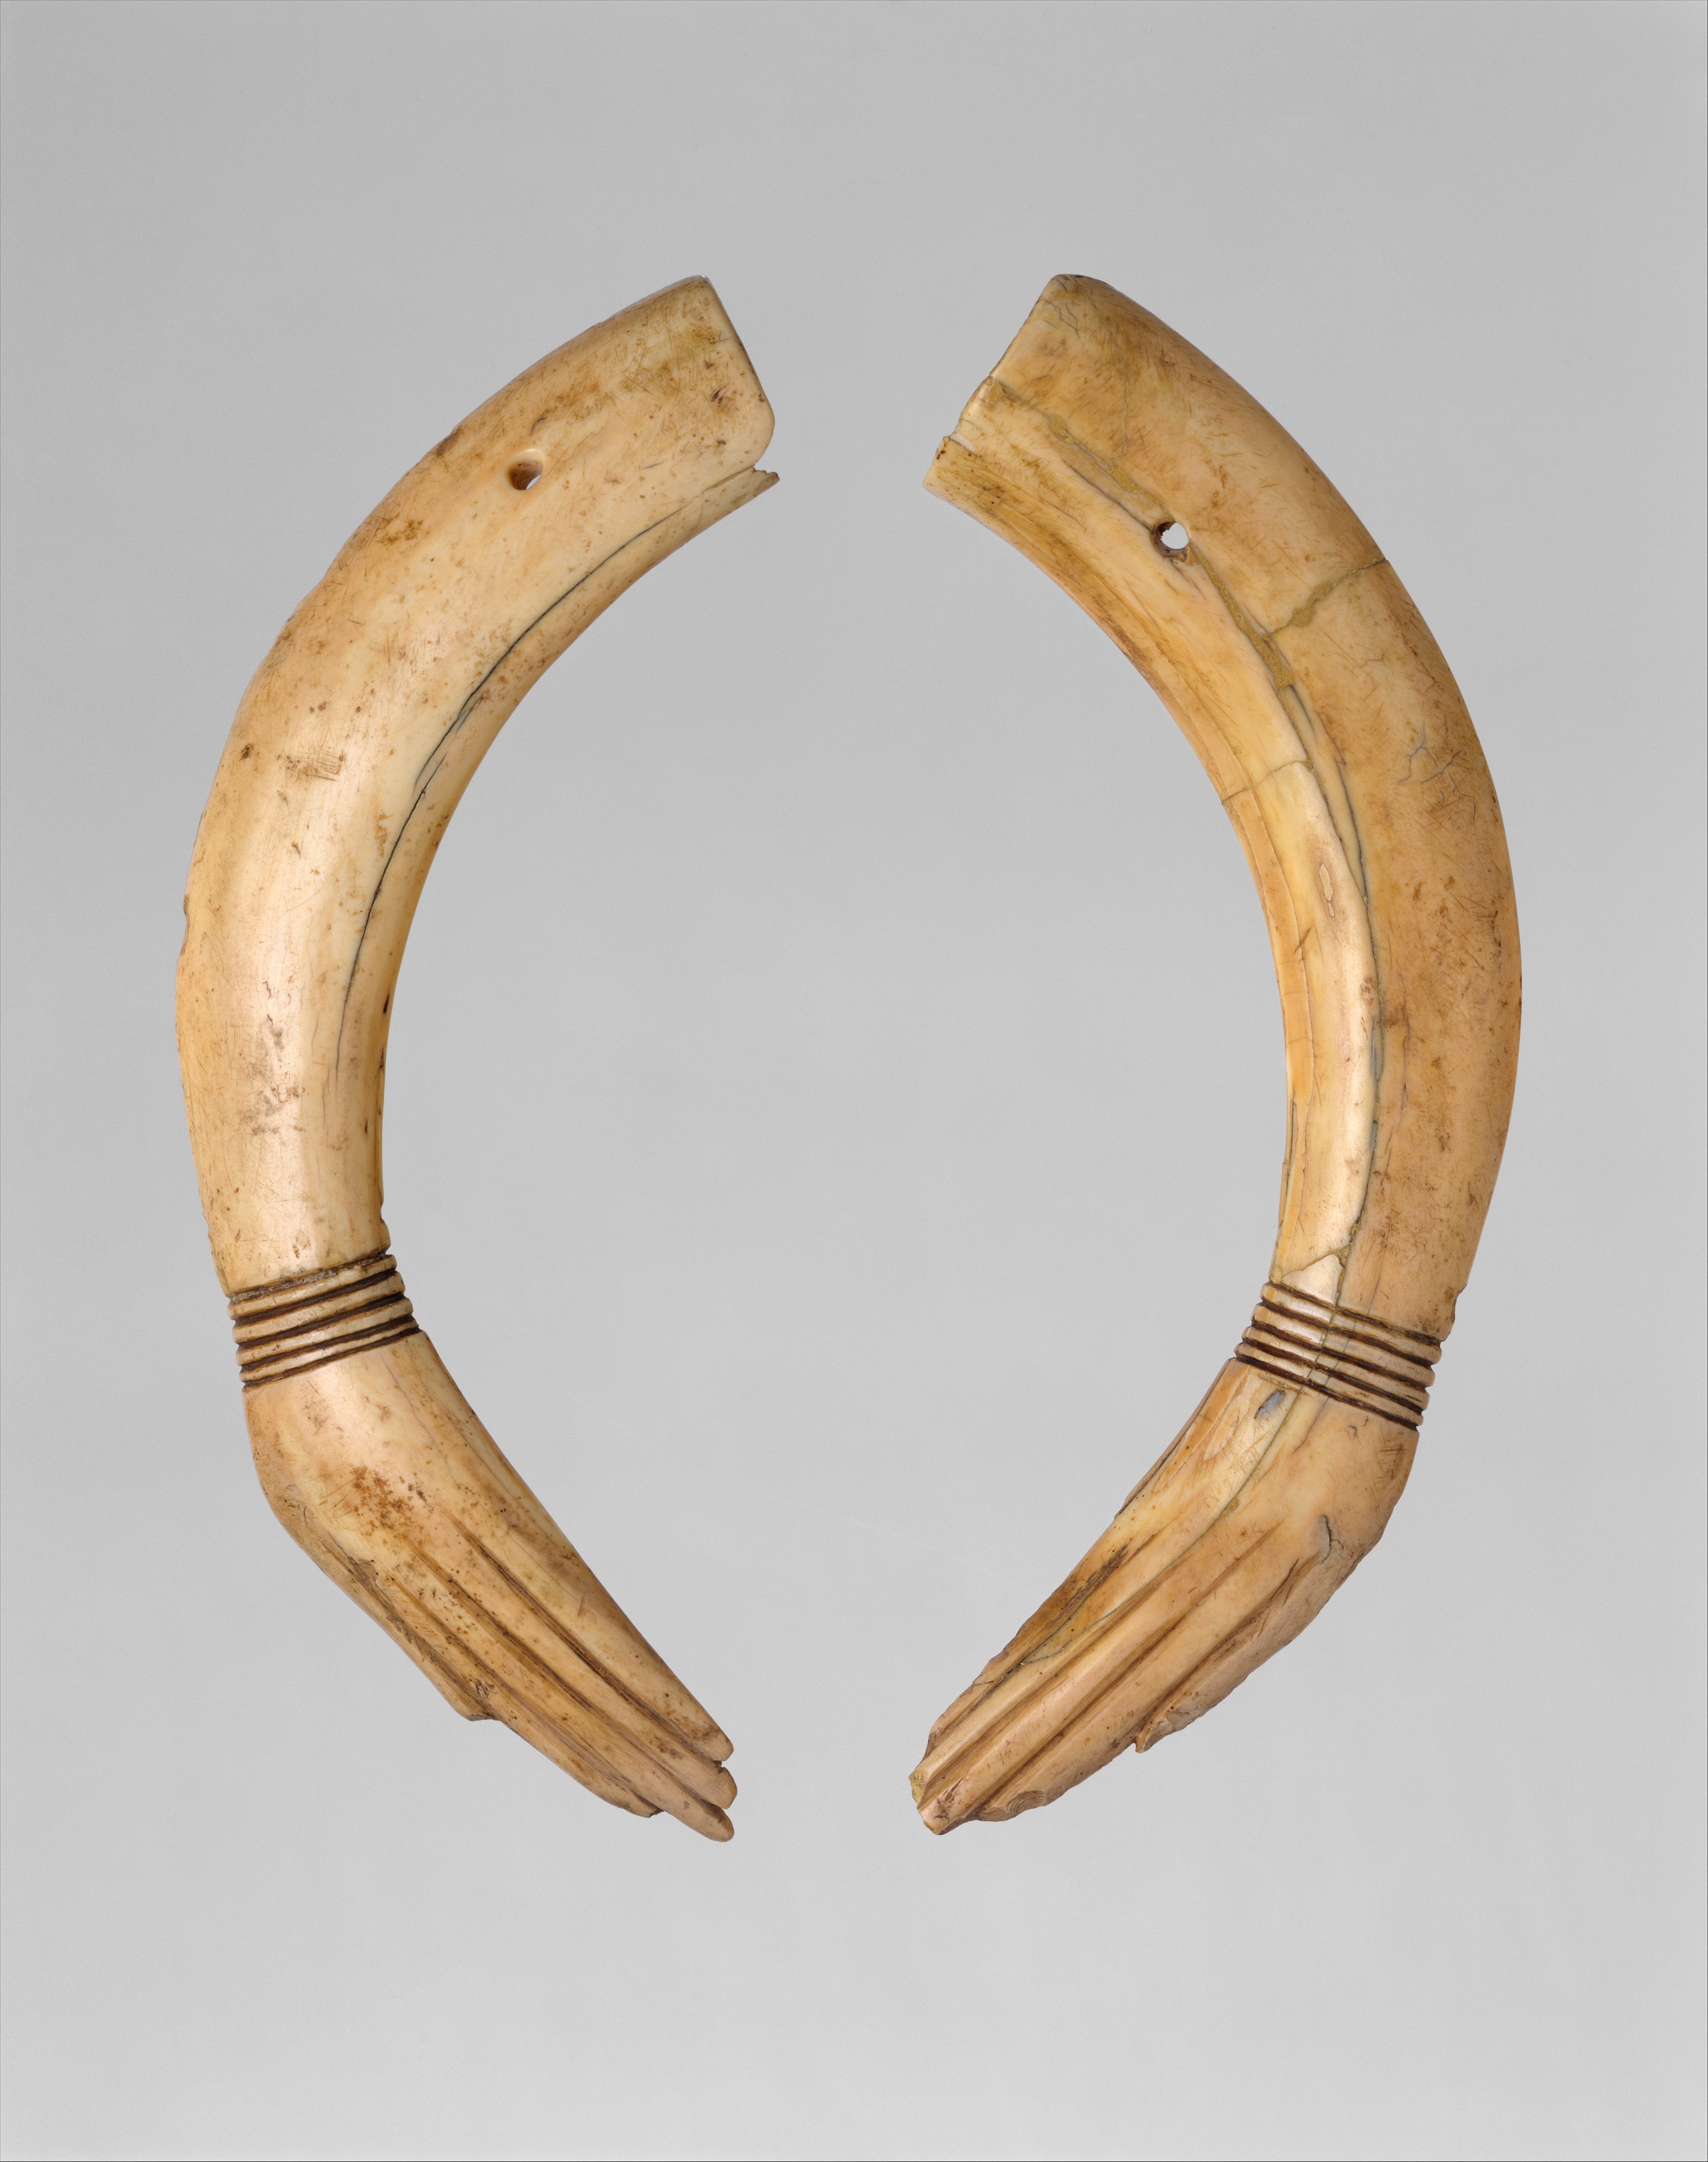 Pair of Clappers, New Kingdom, Amarna Period